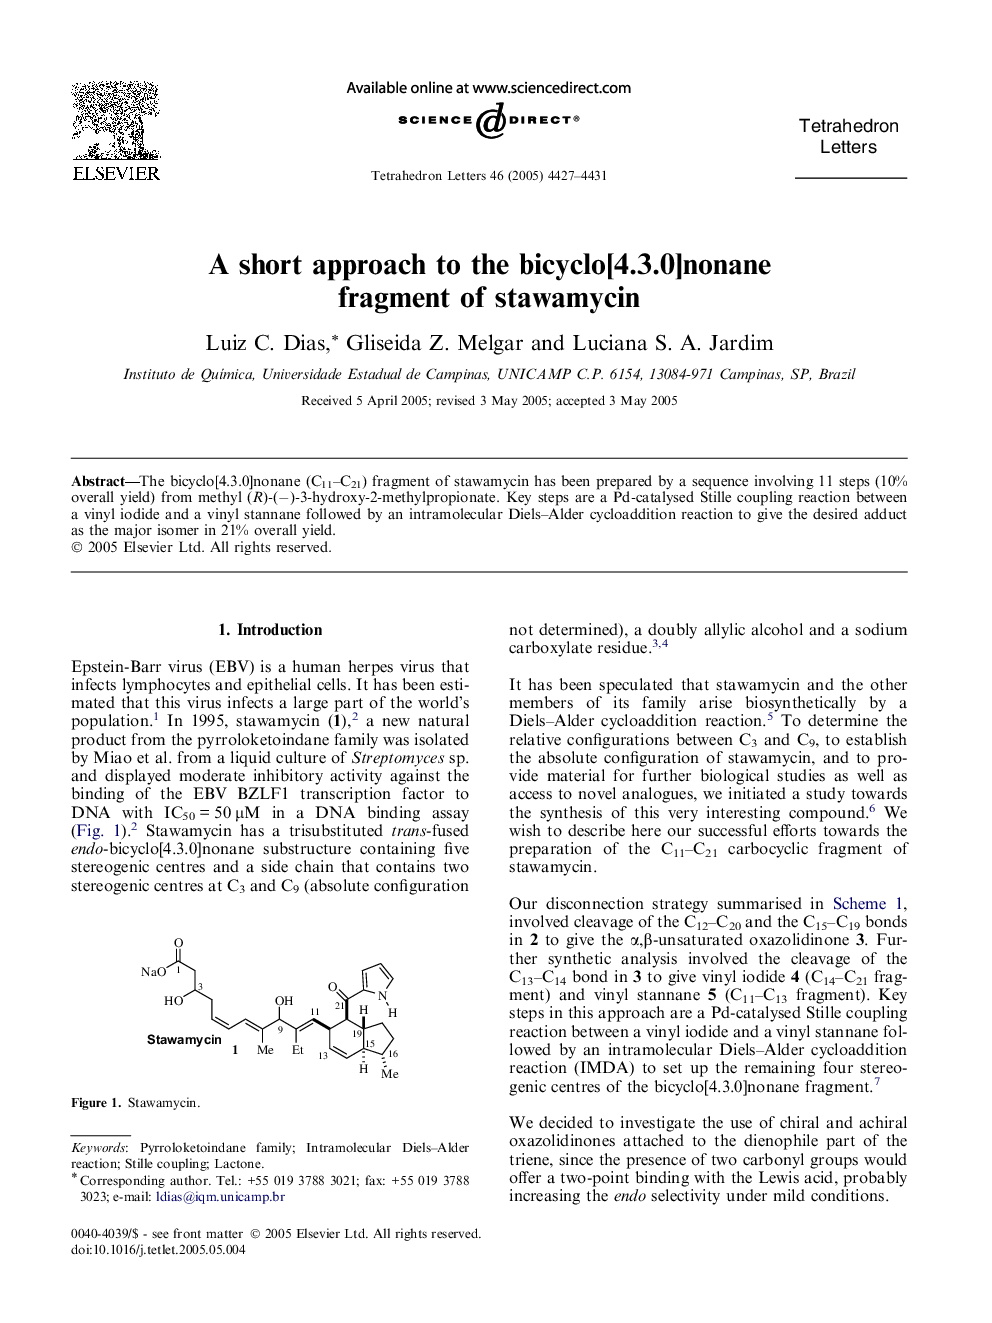 A short approach to the bicyclo[4.3.0]nonane fragment of stawamycin